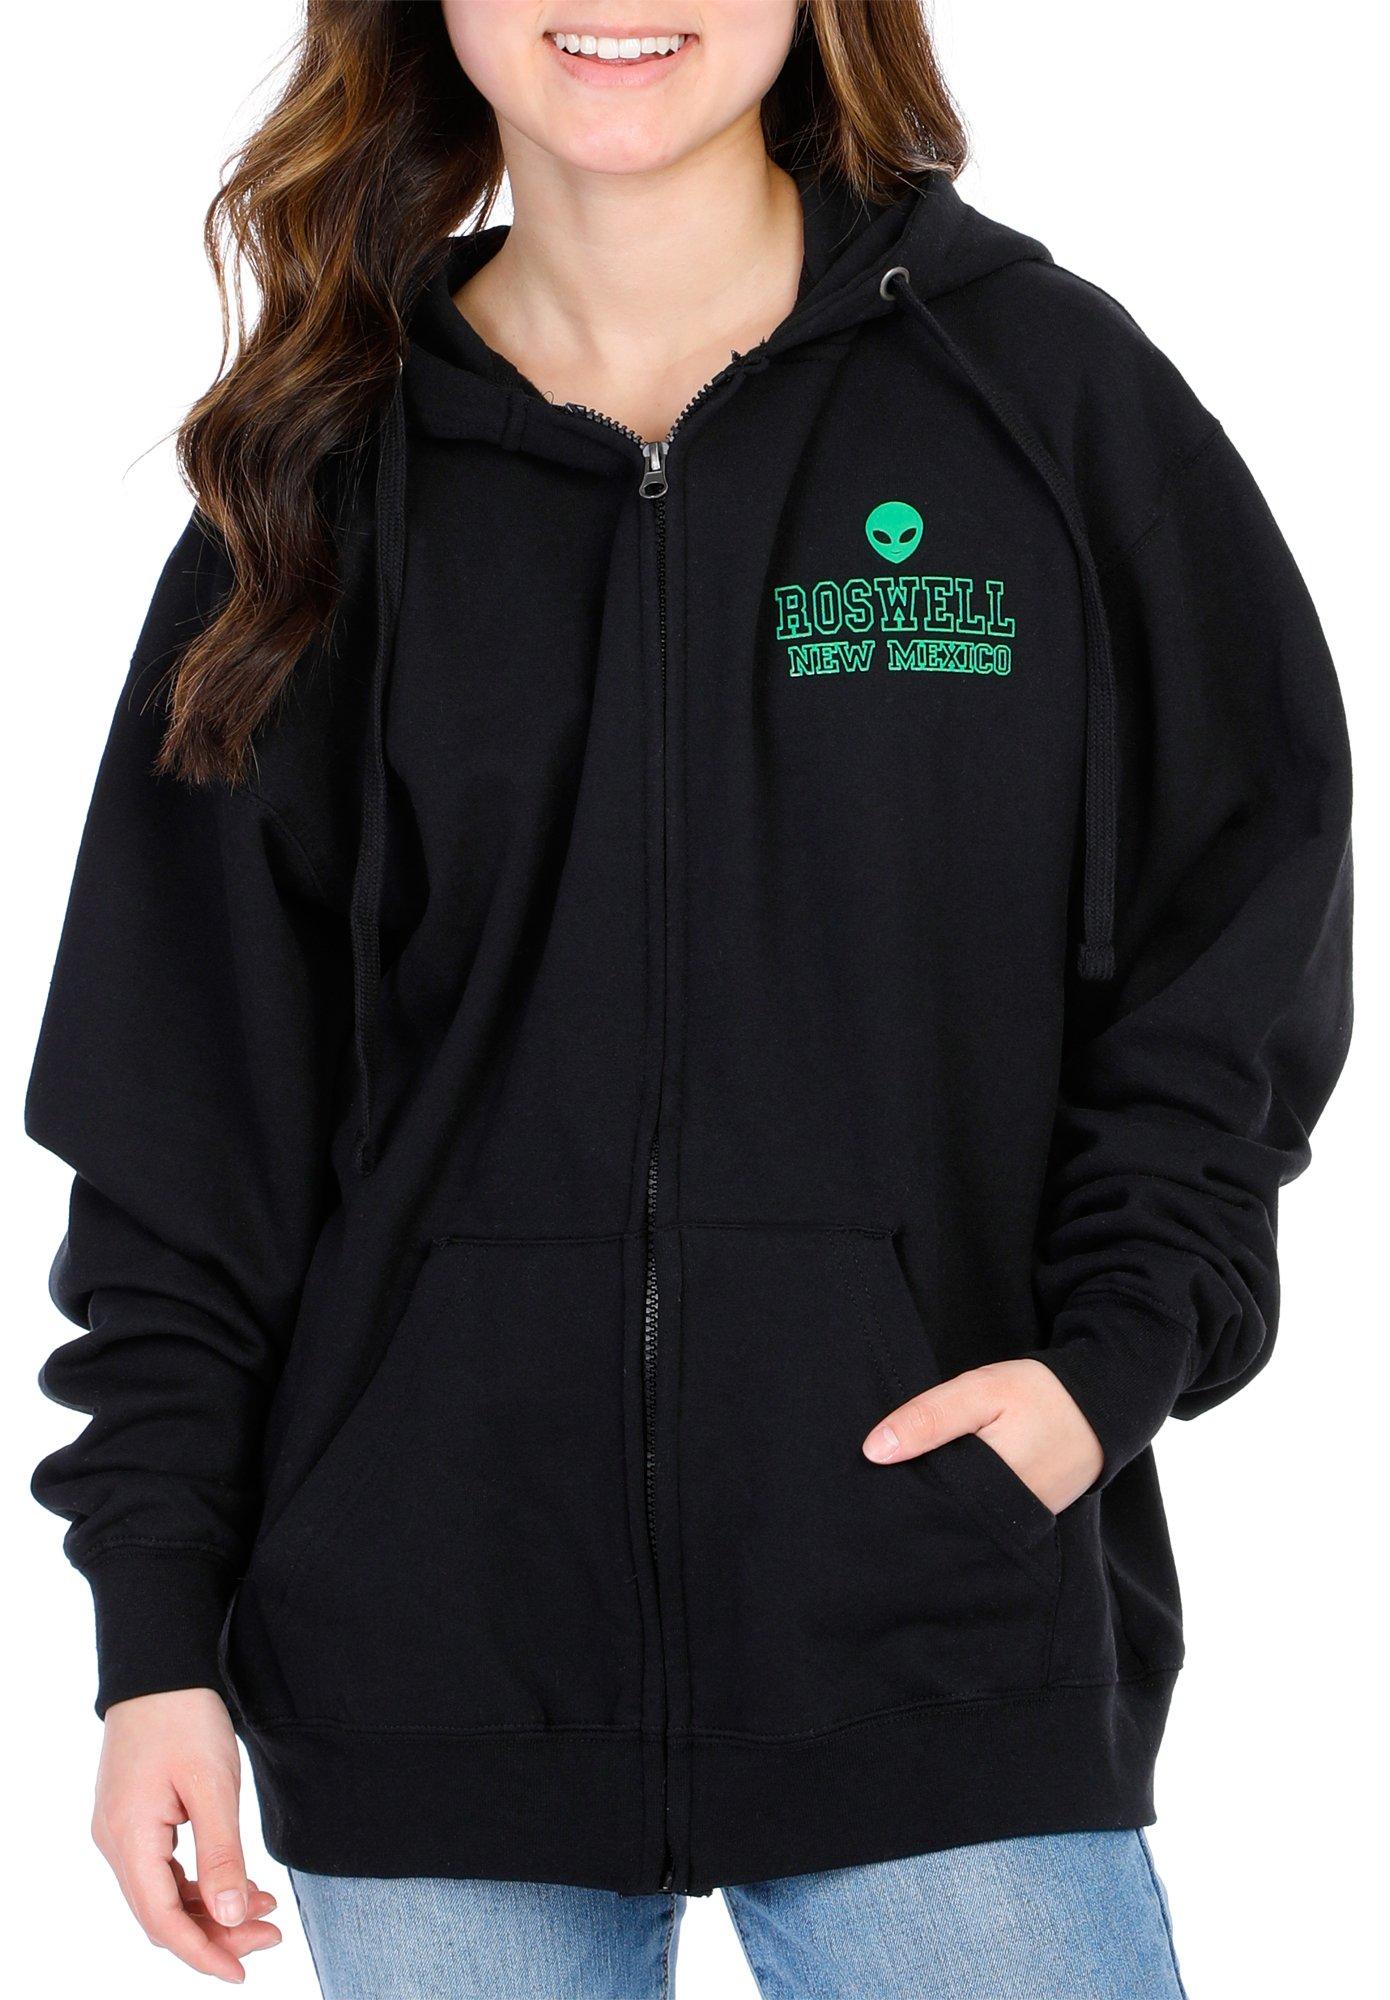 Juniors Rosewell New Mexico Hoodie